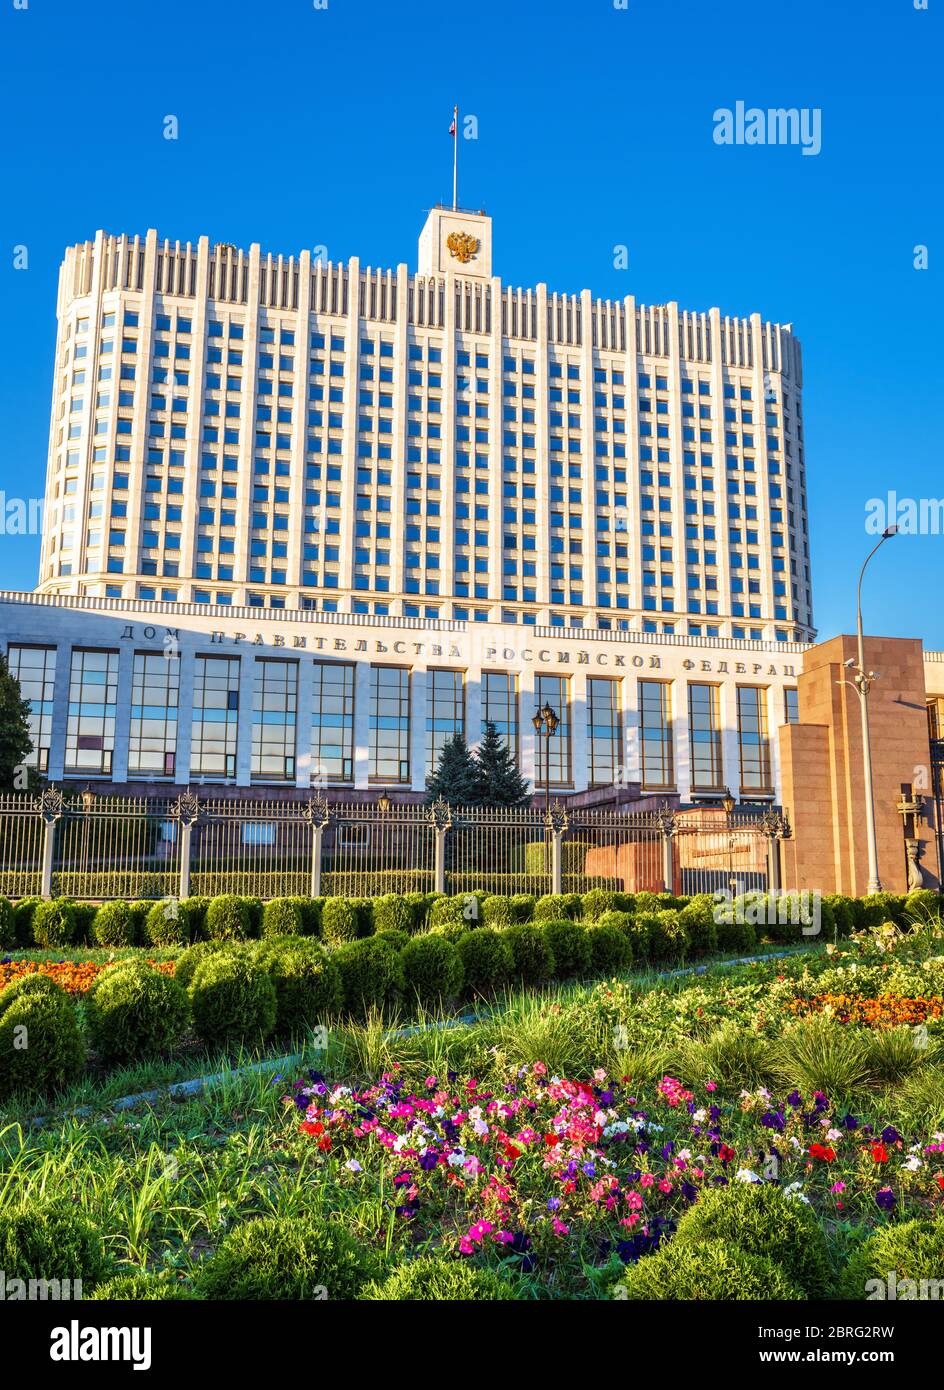 House of Government of Russian Federation (it is written on facade), Moscow. Scenic view of White House and flower garden in the Moscow center. Vertic Stock Photo